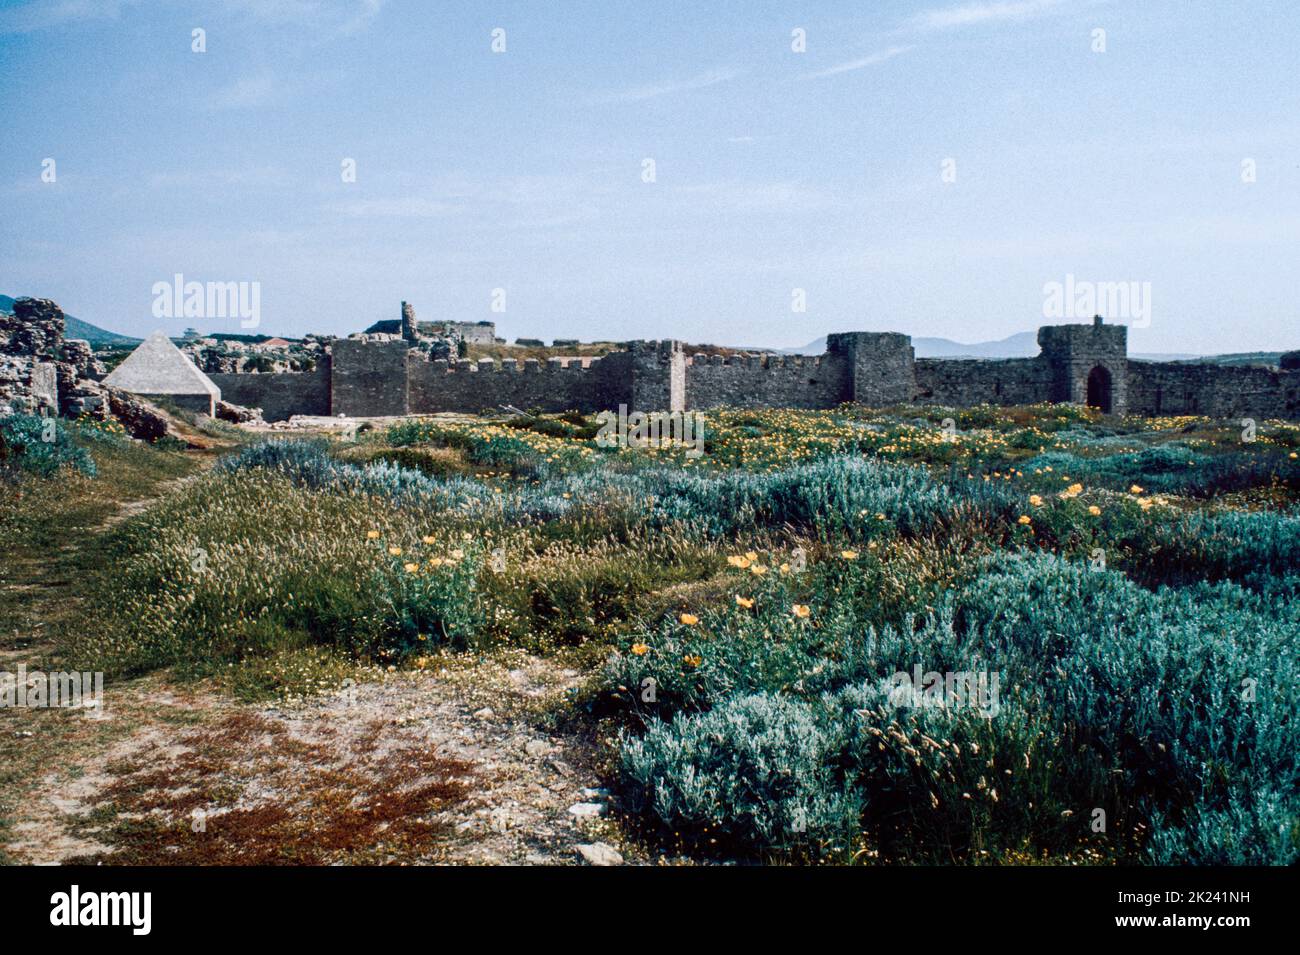 Castle of Methoni - a medieval fortification in the port town of Methoni (Messenia, Modon) - a village and a former municipality in Messenia, Peloponnese, Greece. April 1980. Archival scan from a slide. Stock Photo